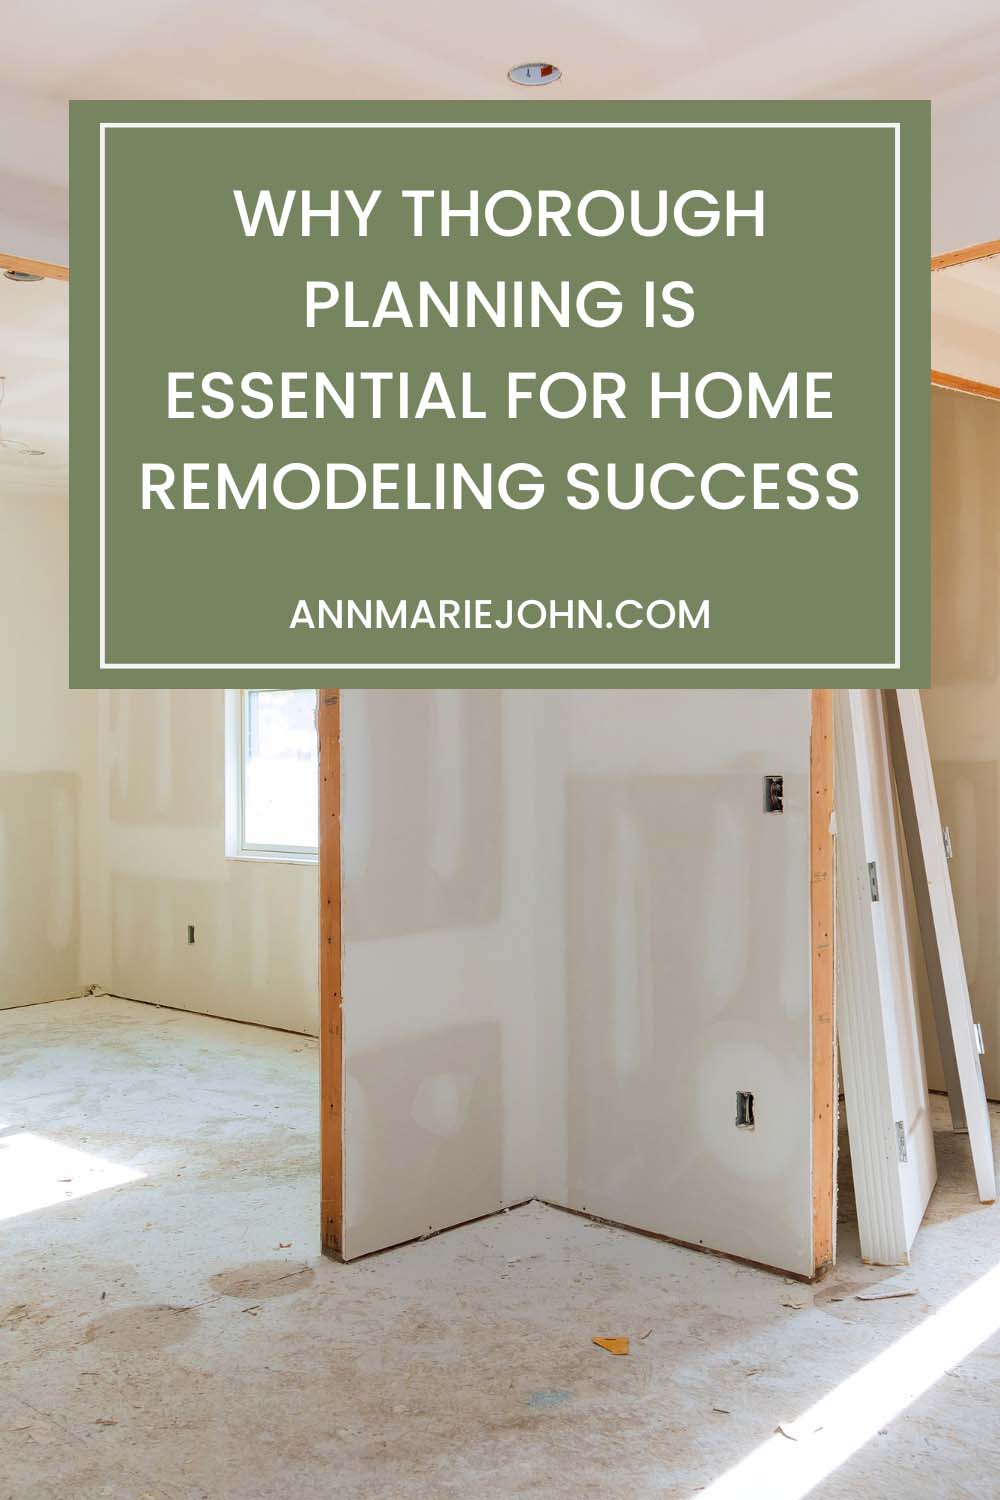 Why Thorough Planning is Essential for Home Remodeling Success